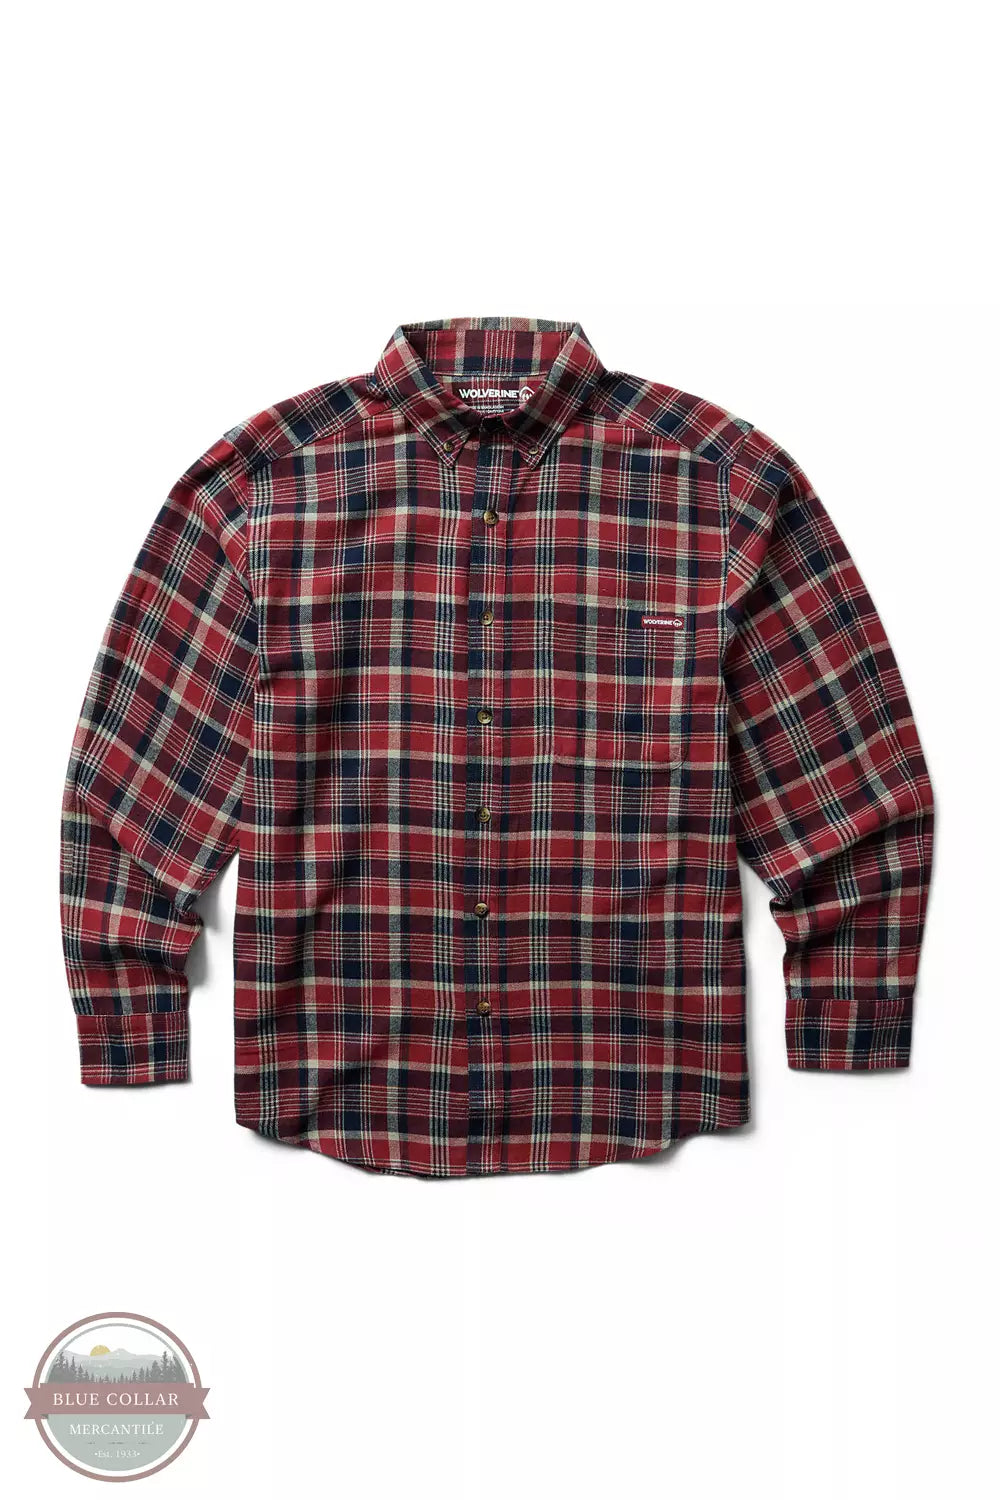 Wolverine W1211540 Hastings Flannel Shirt Barn Red Front View